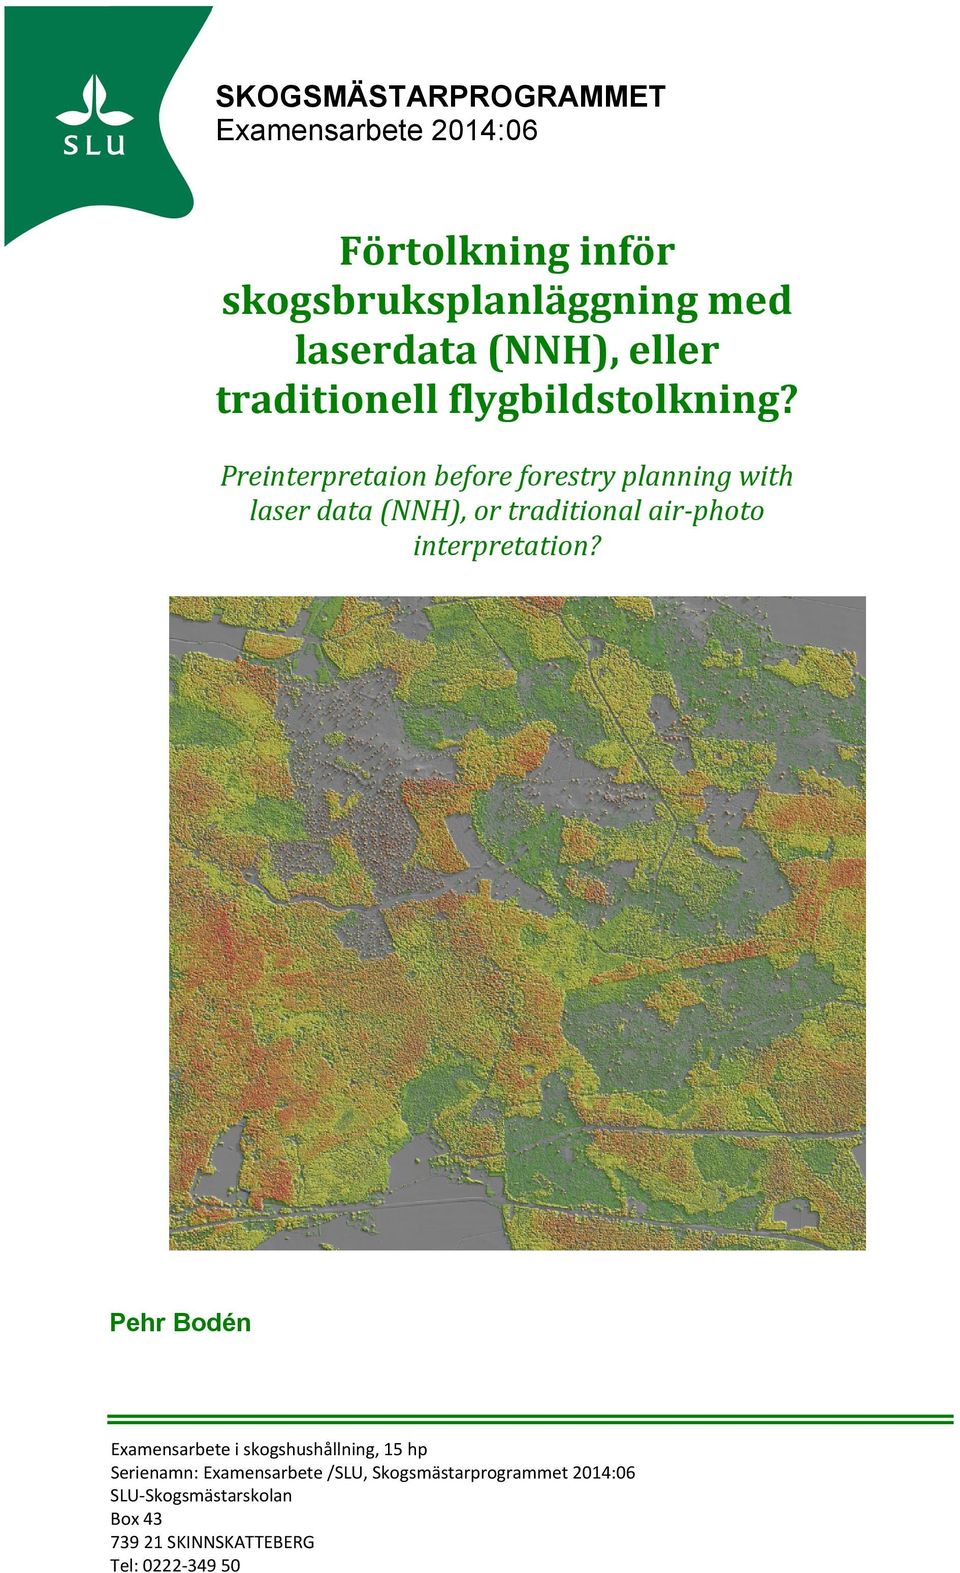 Preinterpretaion before forestry planning with laser data (NNH), or traditional air-photo interpretation?